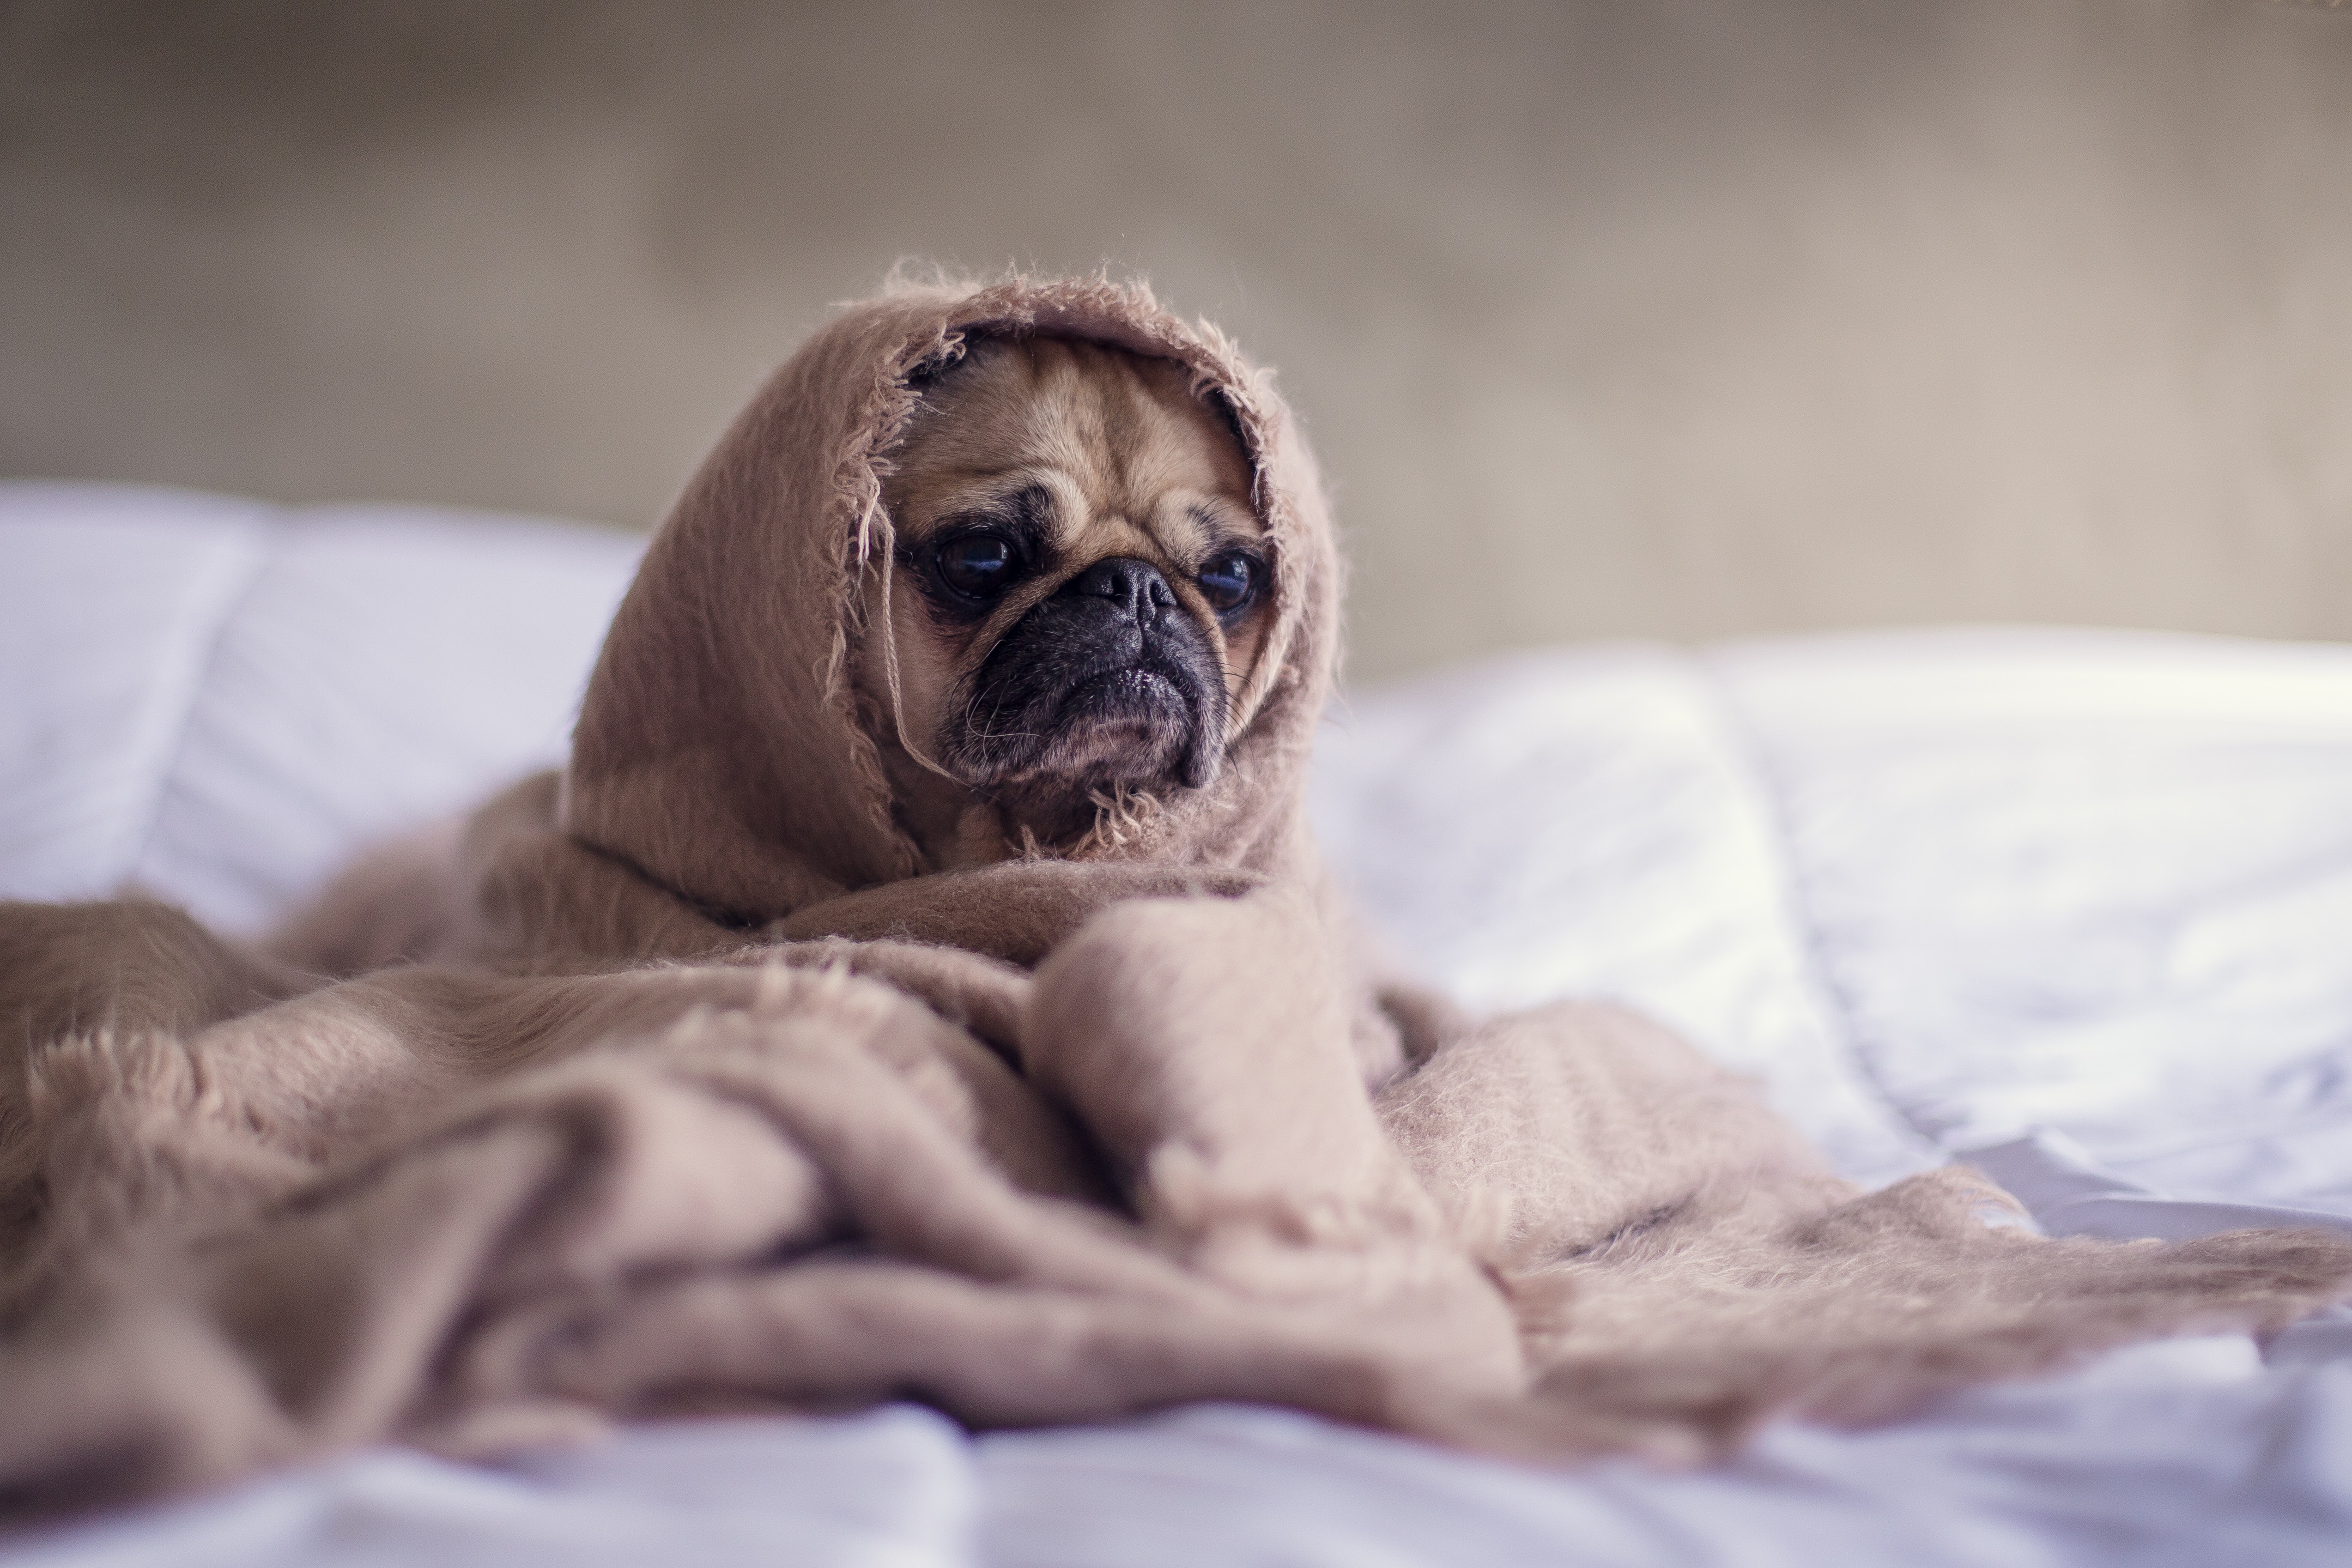 A pug with a blanket wrapped around its head, looking sad.